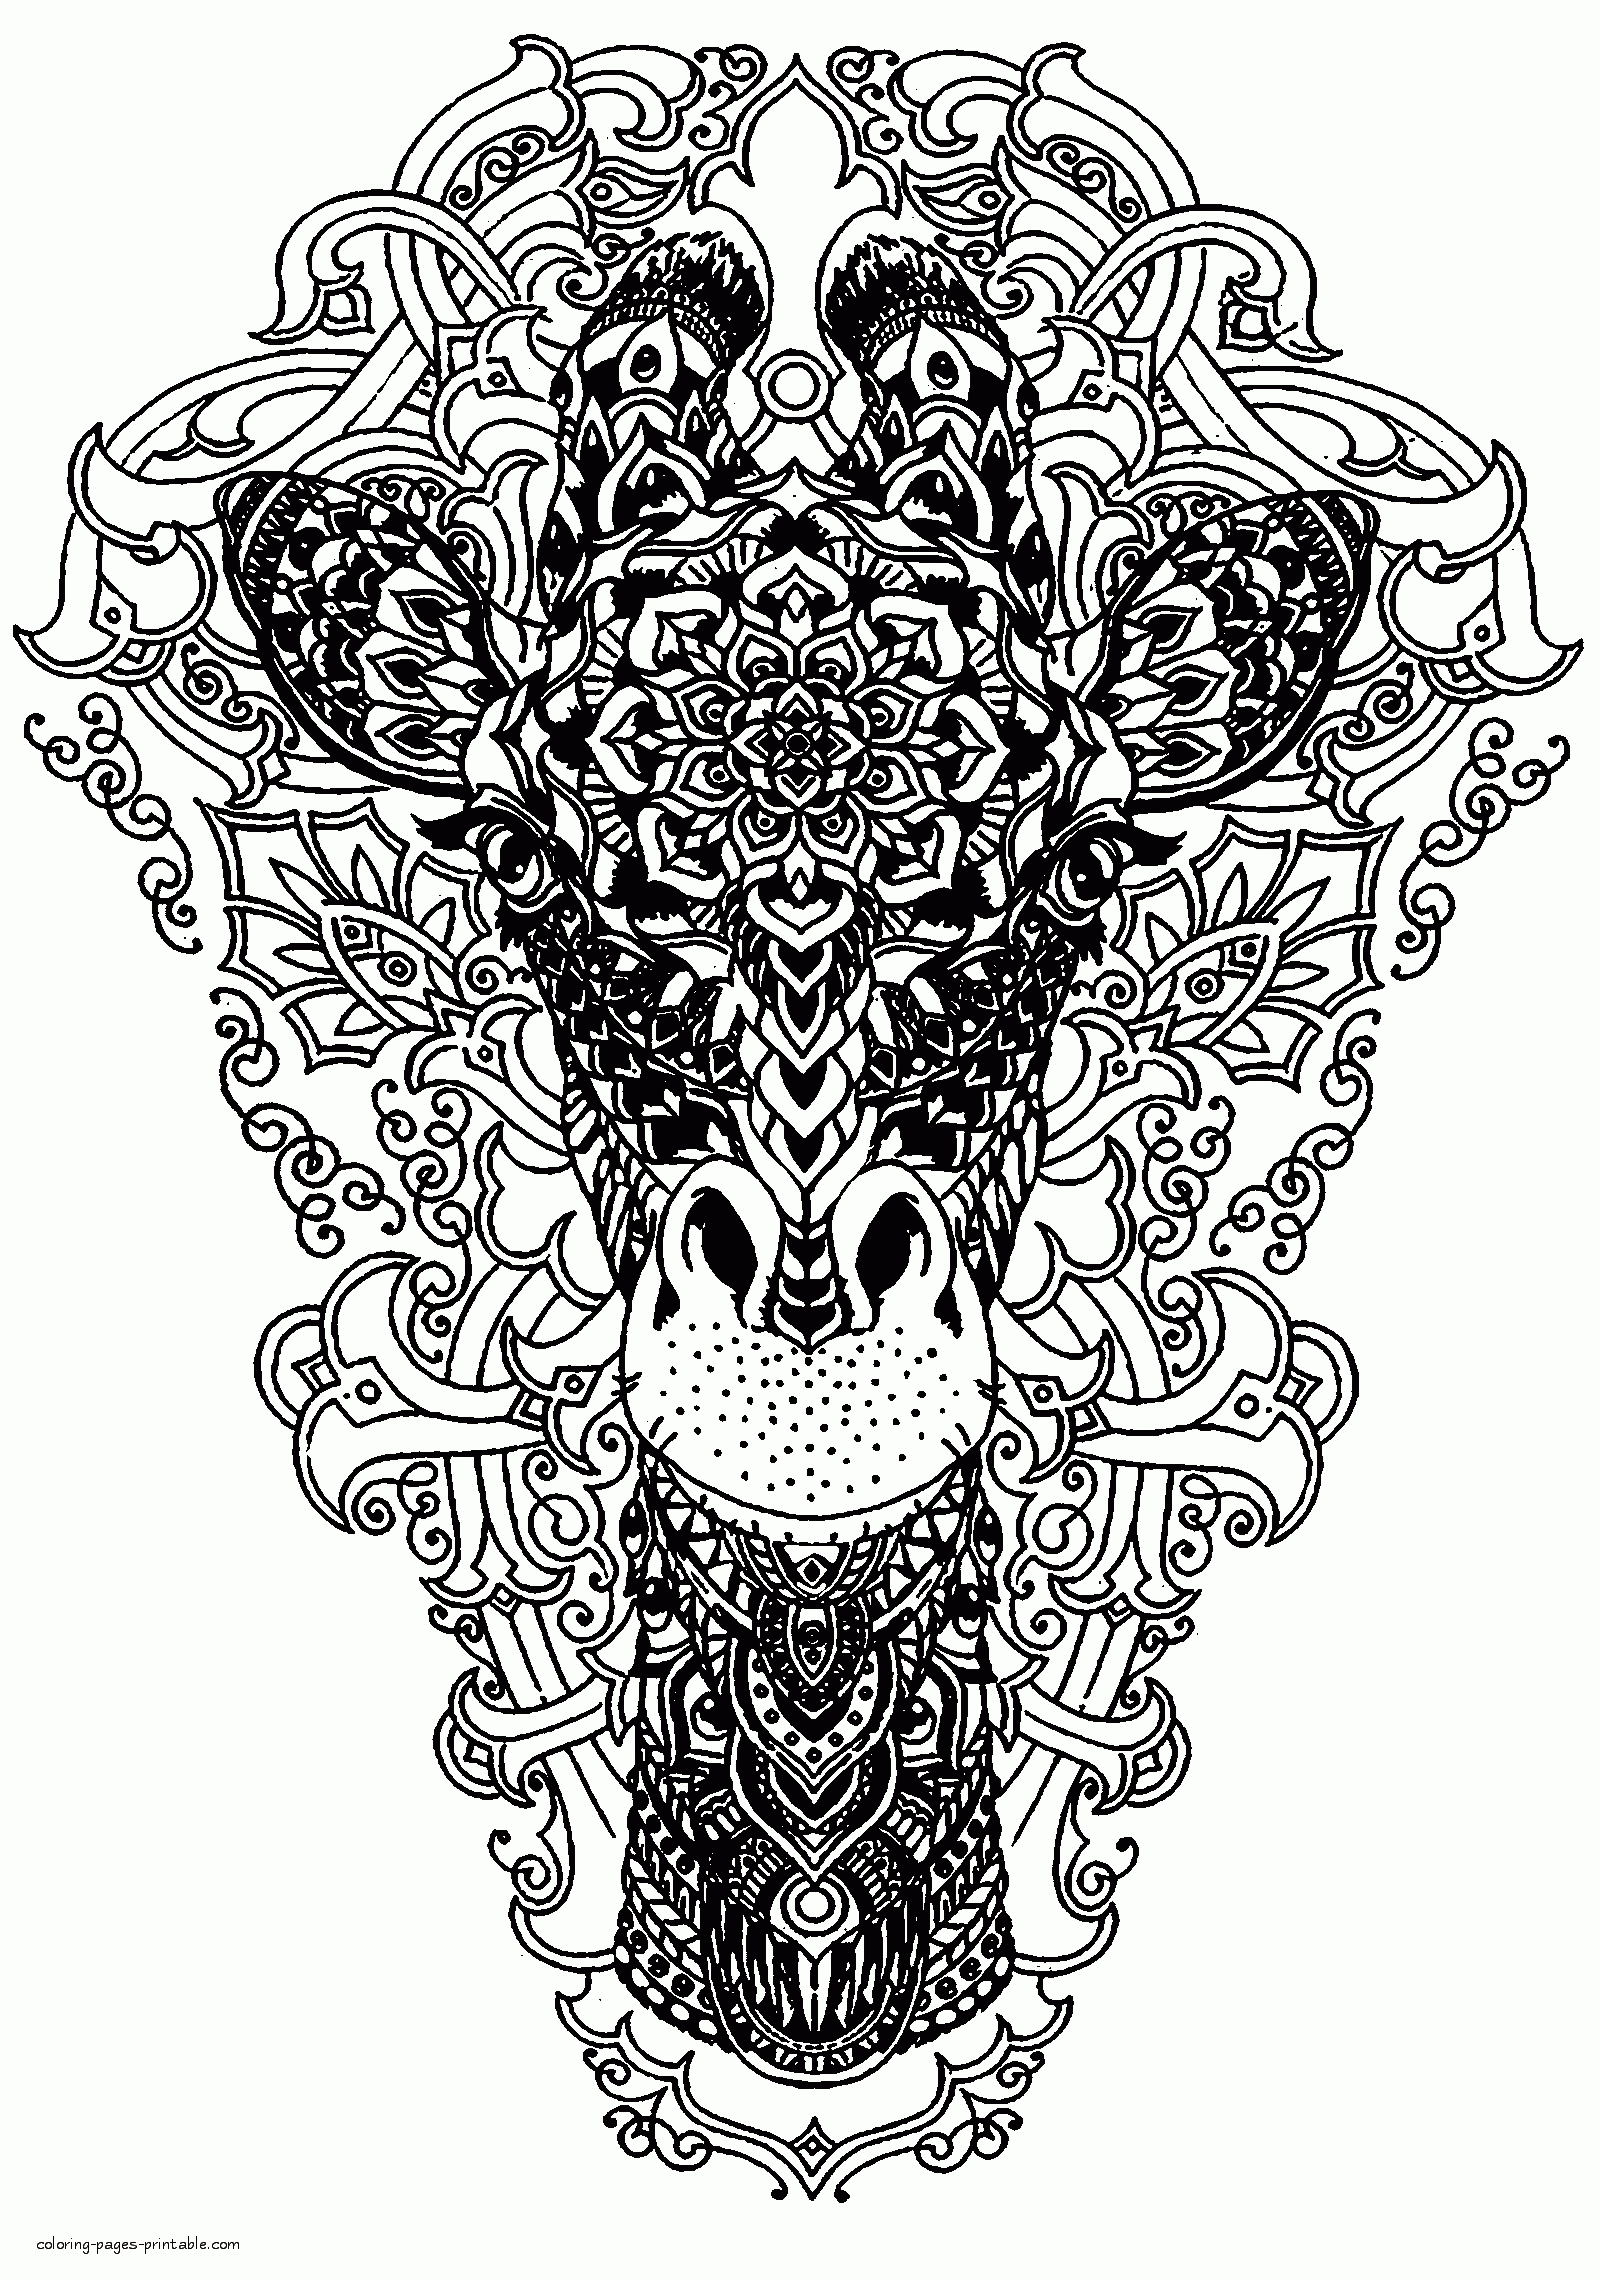 Difficult Giraffe Coloring Page    COLORING PAGES PRINTABLE.COM